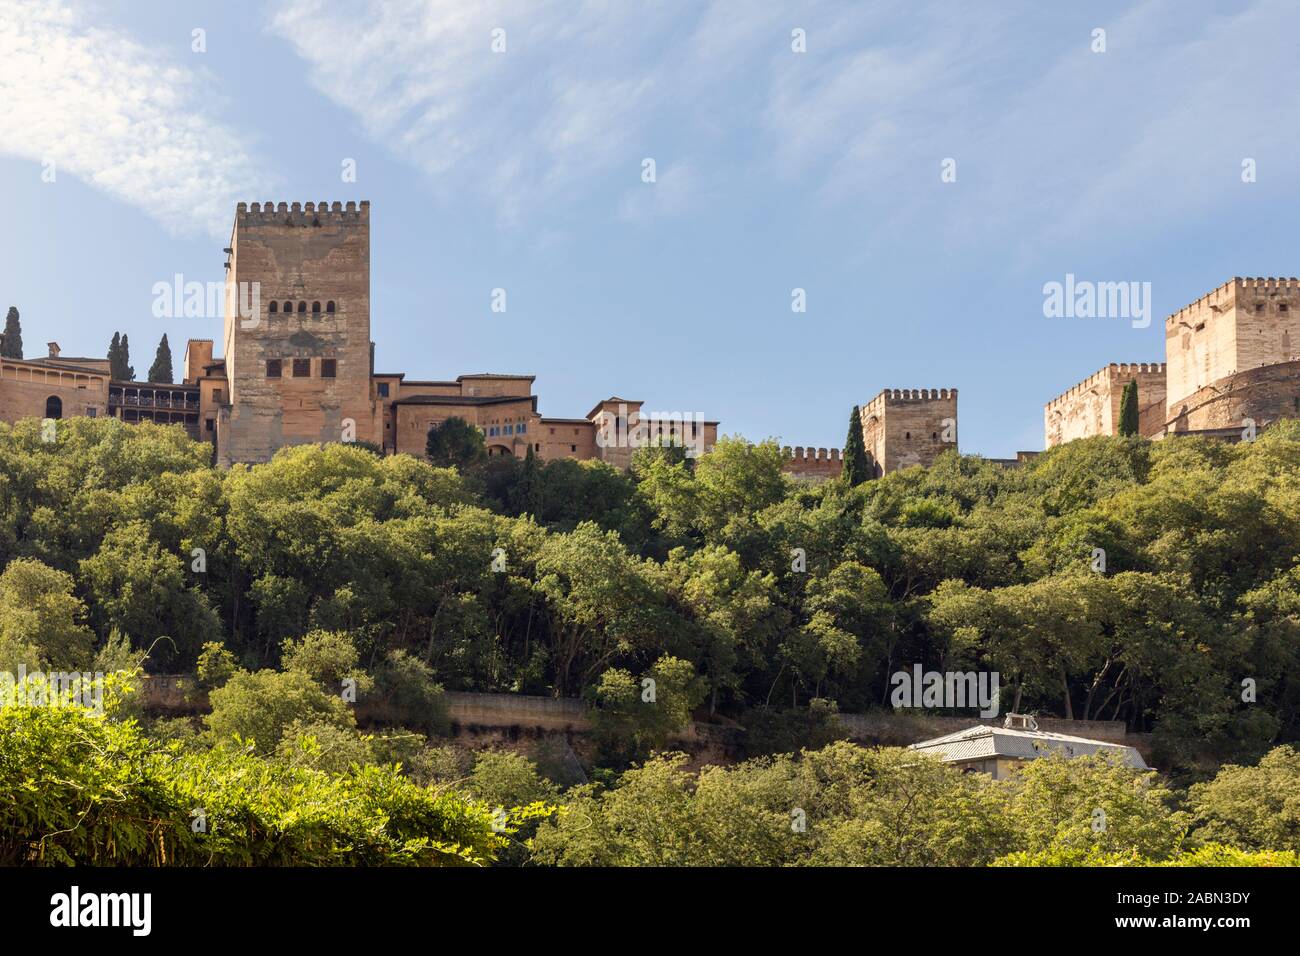 The Alhambra palace seen from the Albaicin, Granada, Granada Province, Andalusia, southern Spain. Stock Photo